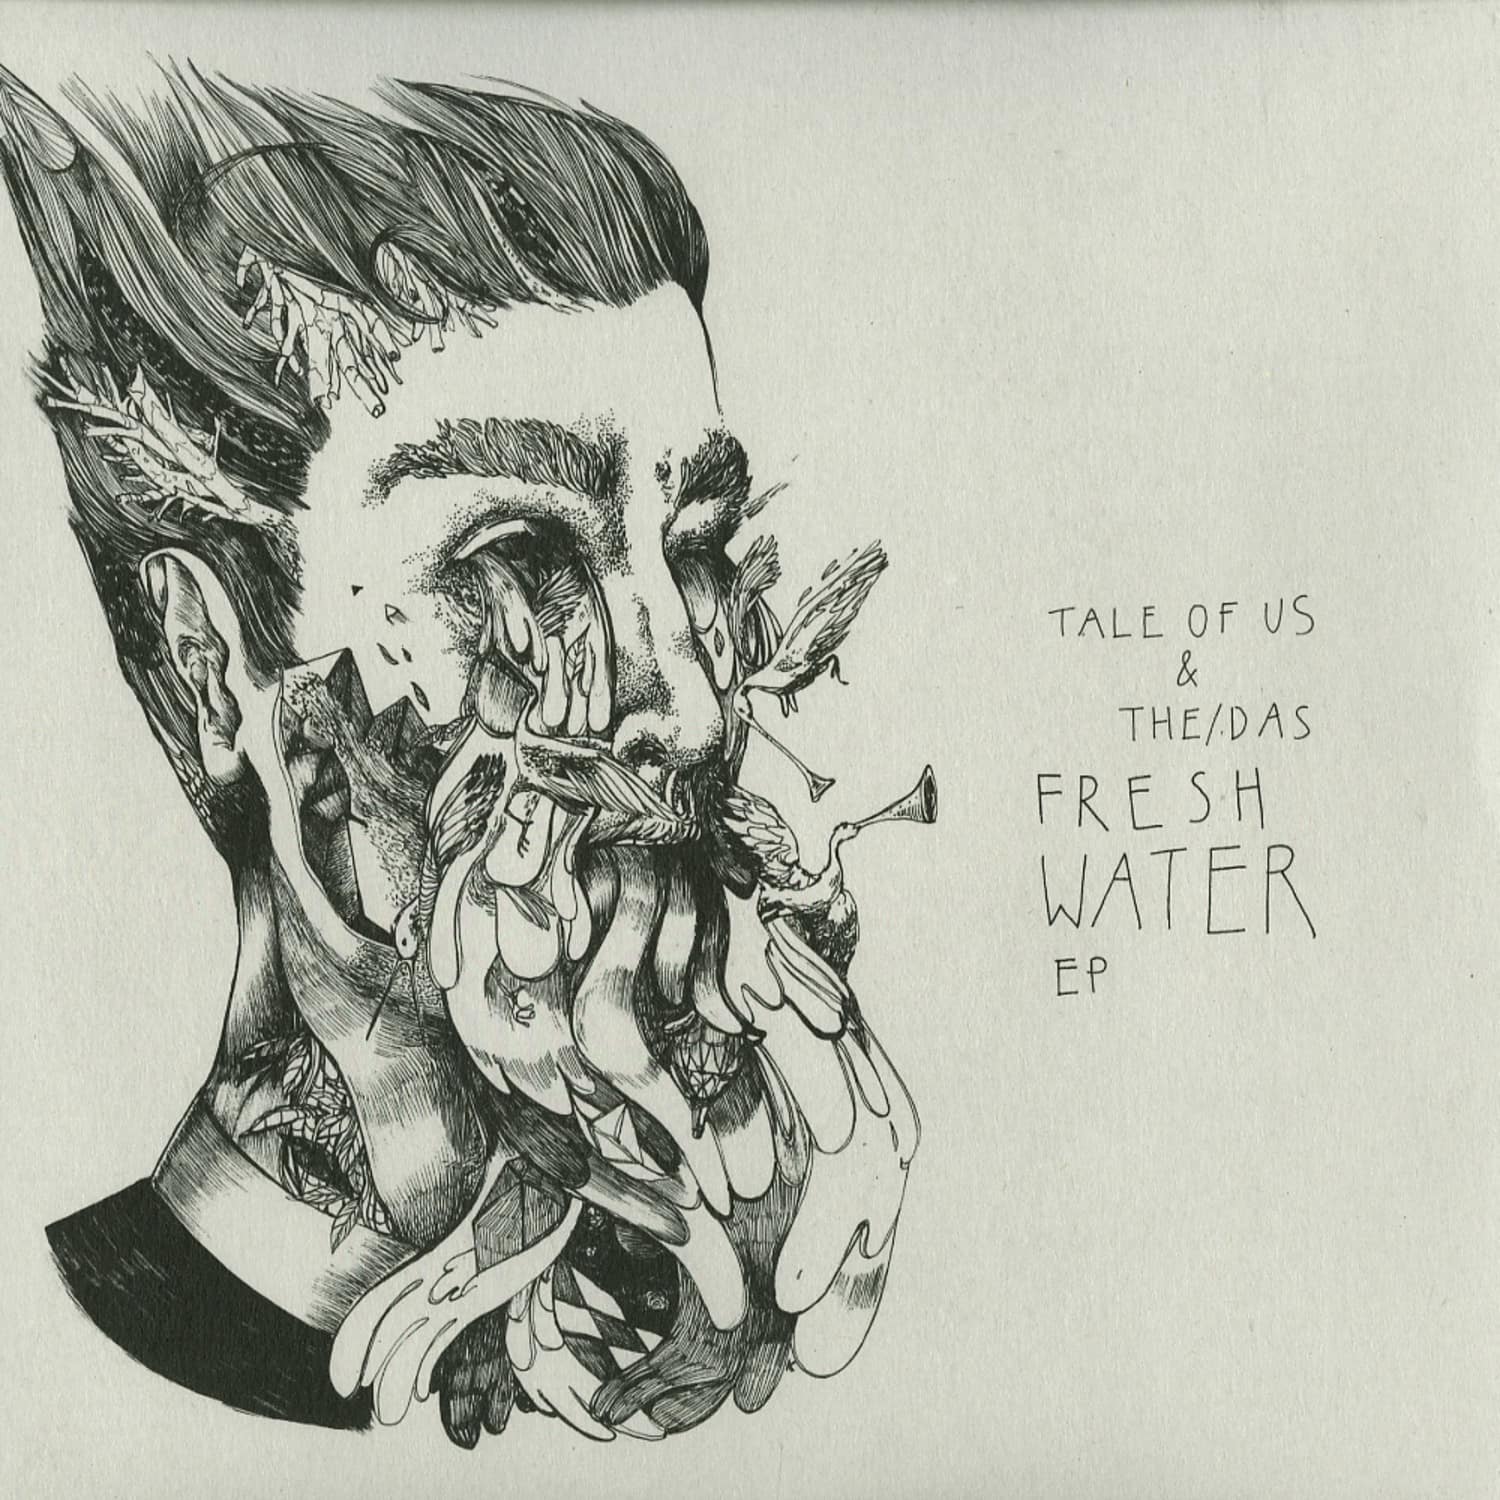 Tale Of Us & The/Das - FRESH WATER EP